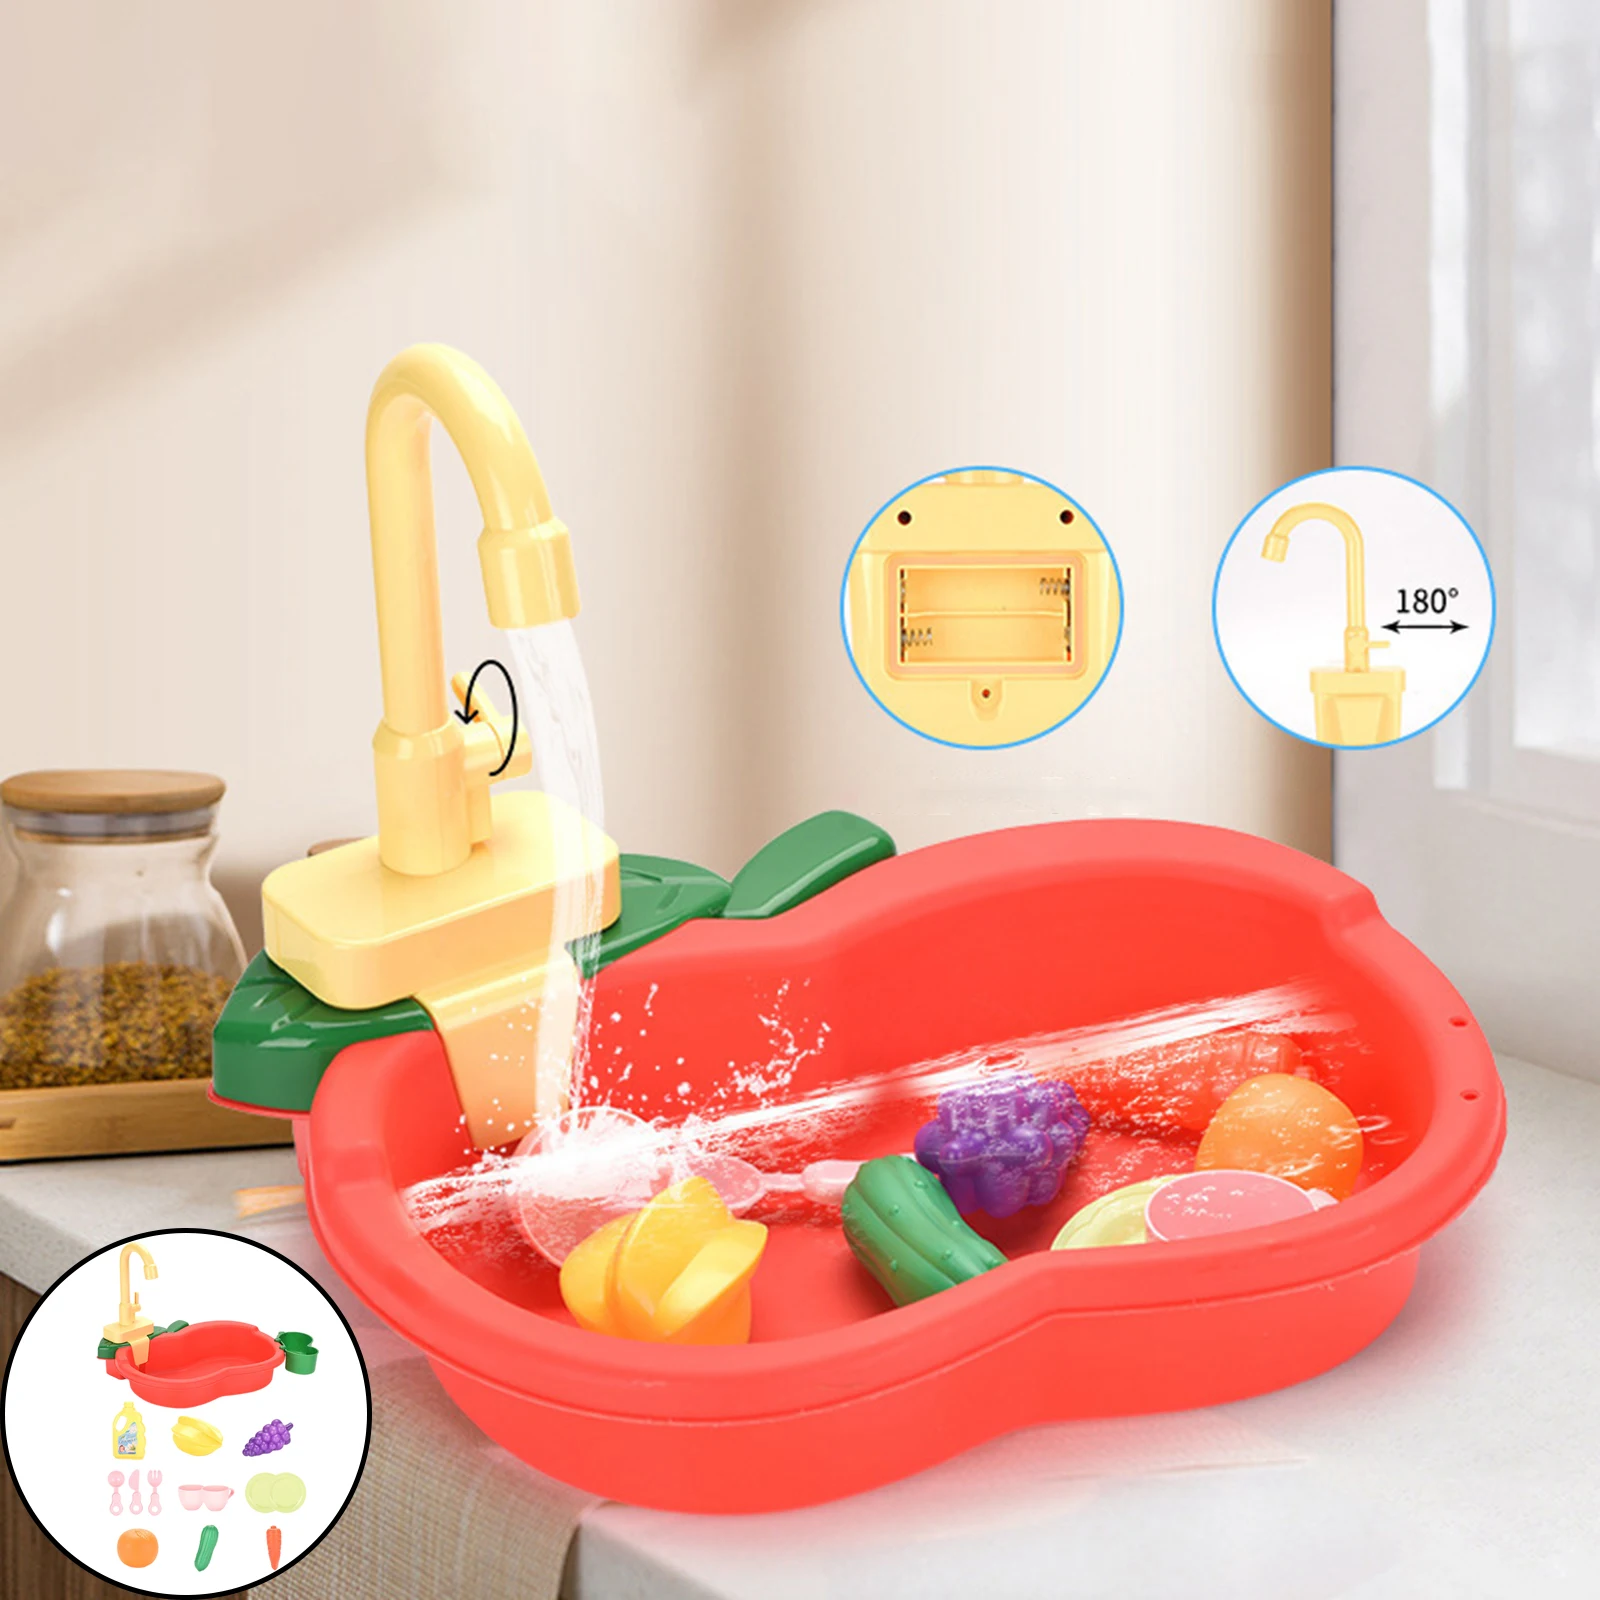 Simulated Play Sink Toys and Working Faucet Kitchenware Educational Role Playing Games for Kids Gifts